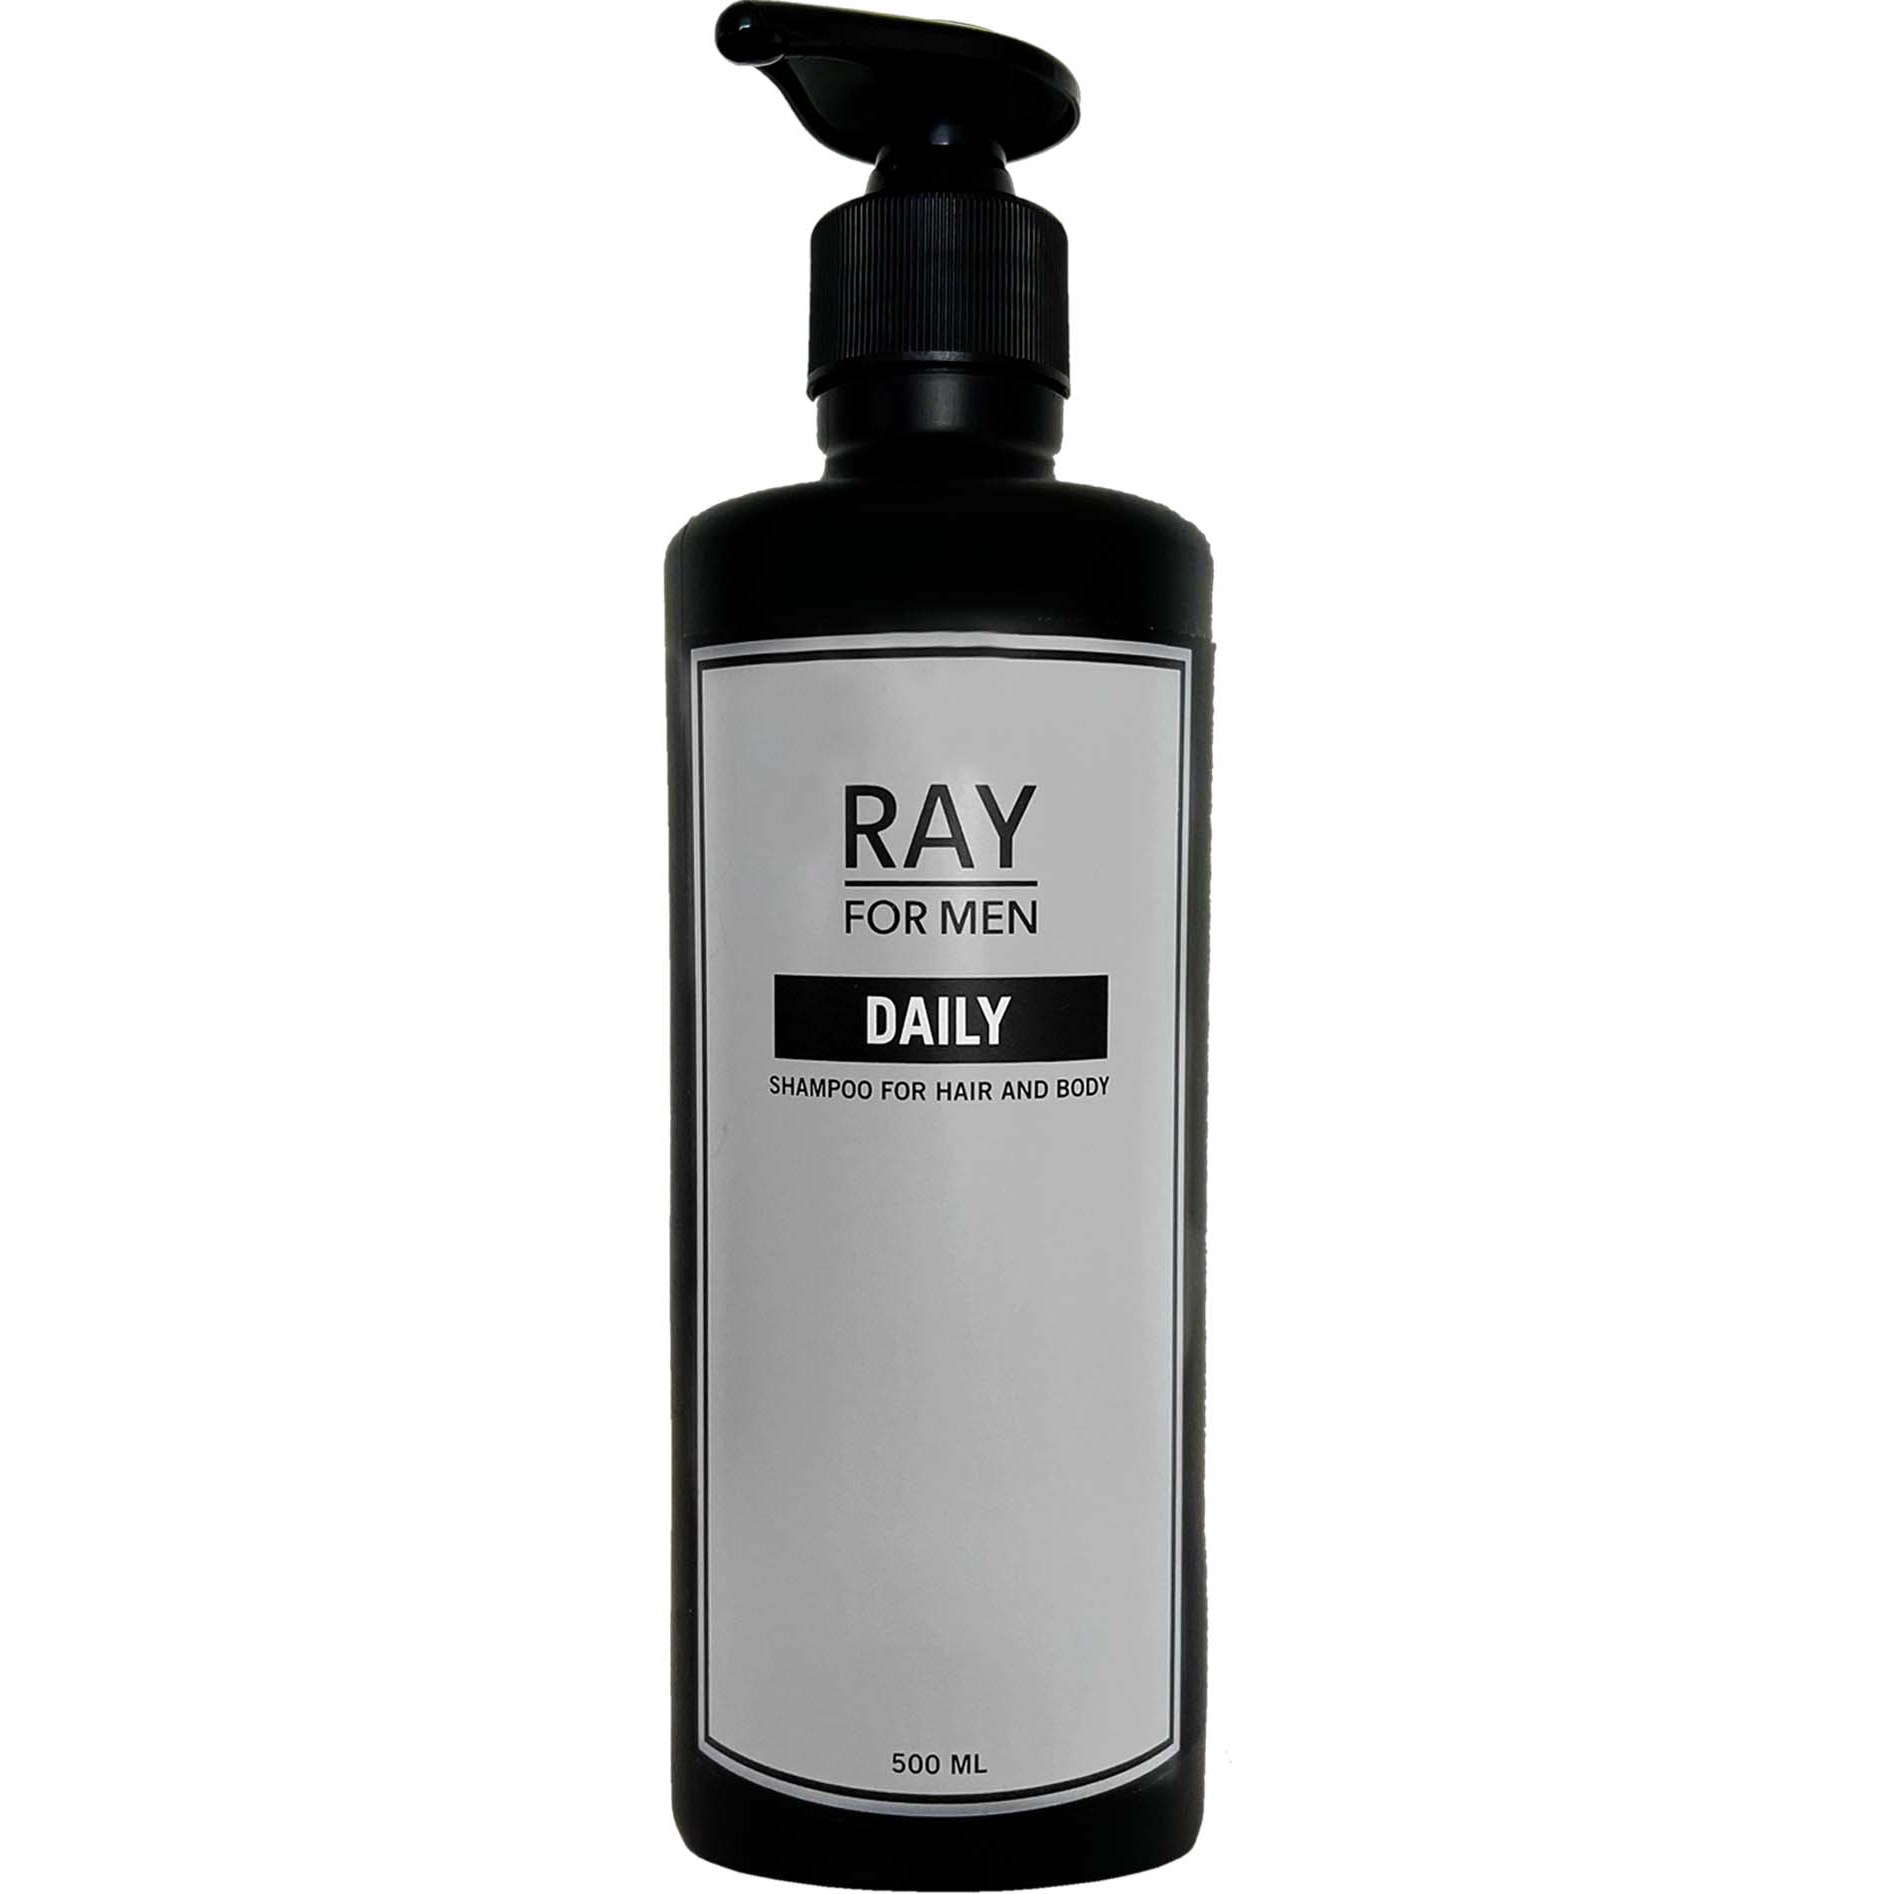 RAY FOR MEN Daily 500 ml